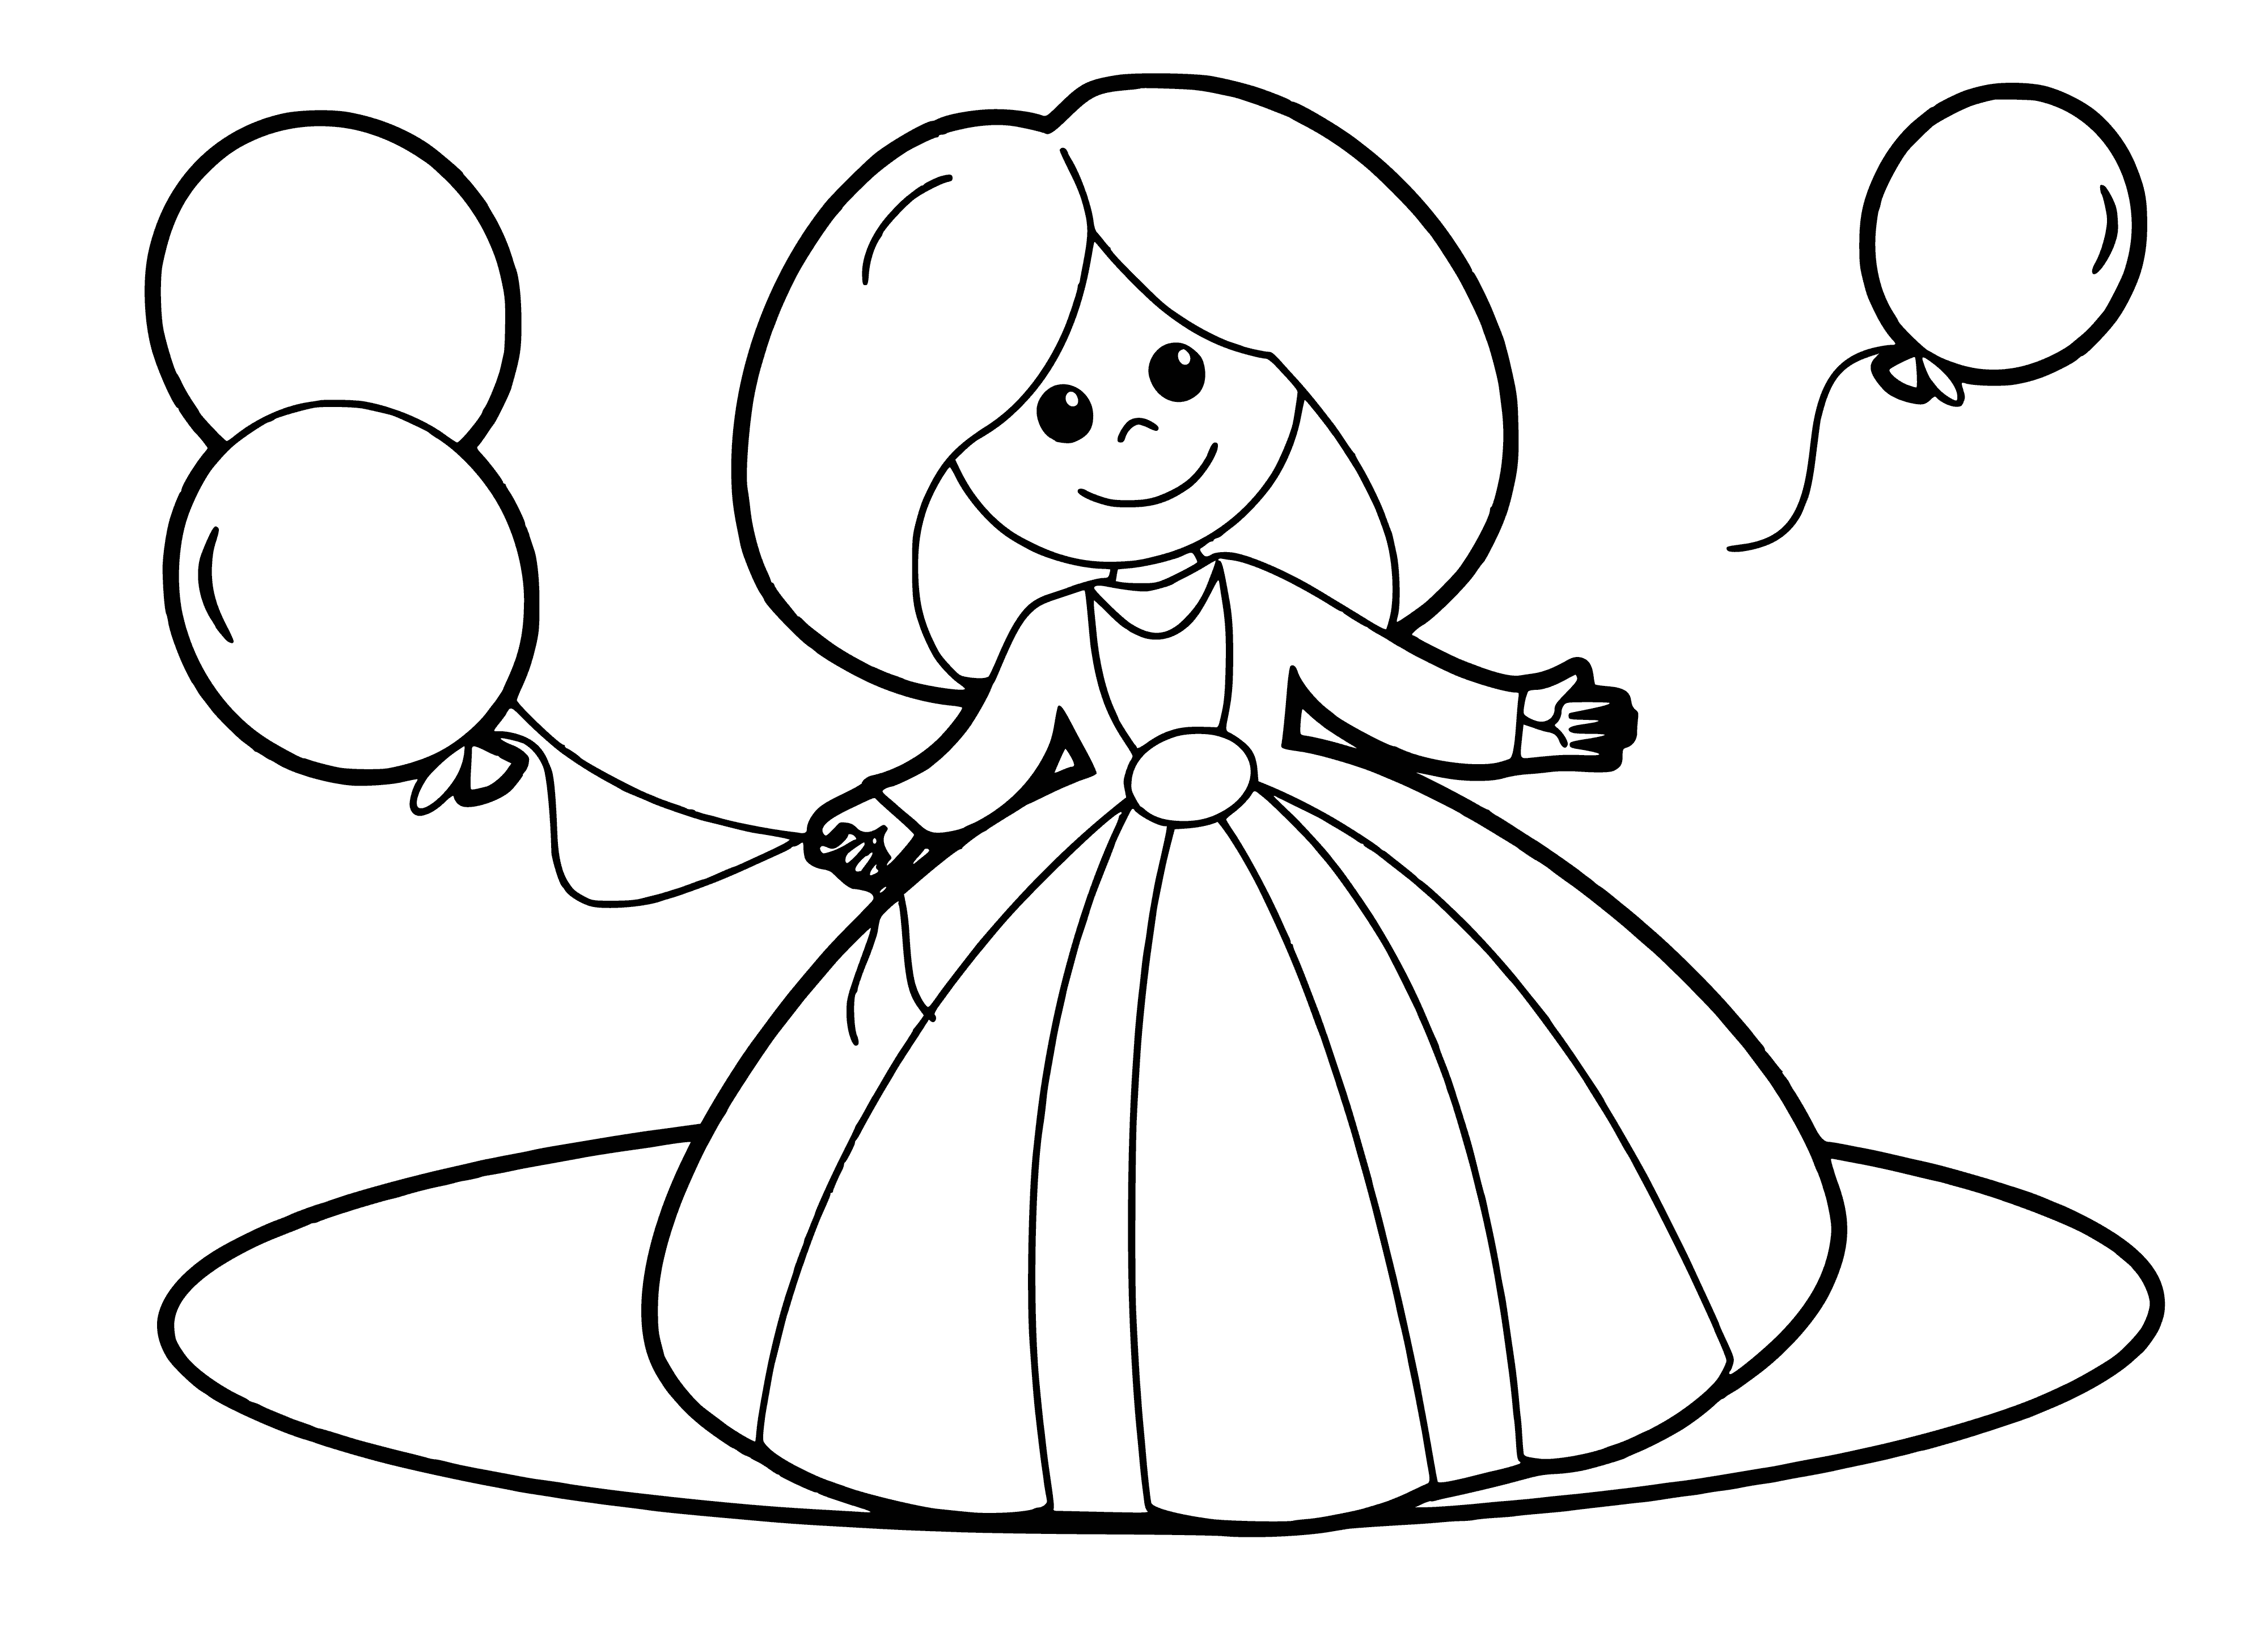 coloring page: 140 characters: A little girl plays with a red ball and laughs as she kicks it.